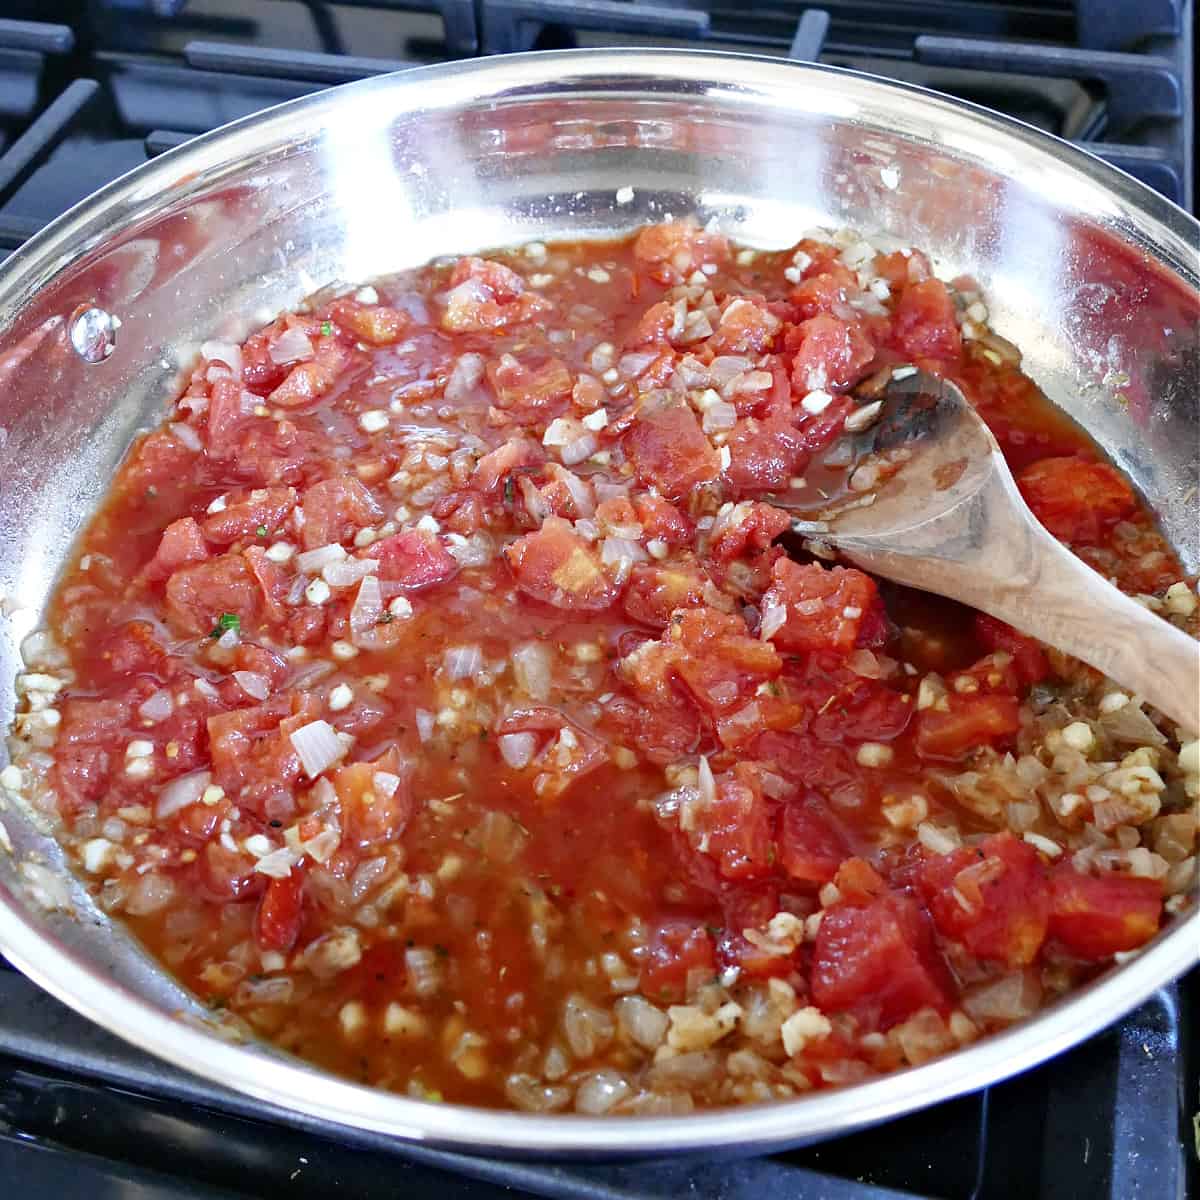 tomatoes, shallots, garlic, and spices cooking in a skillet on the stove